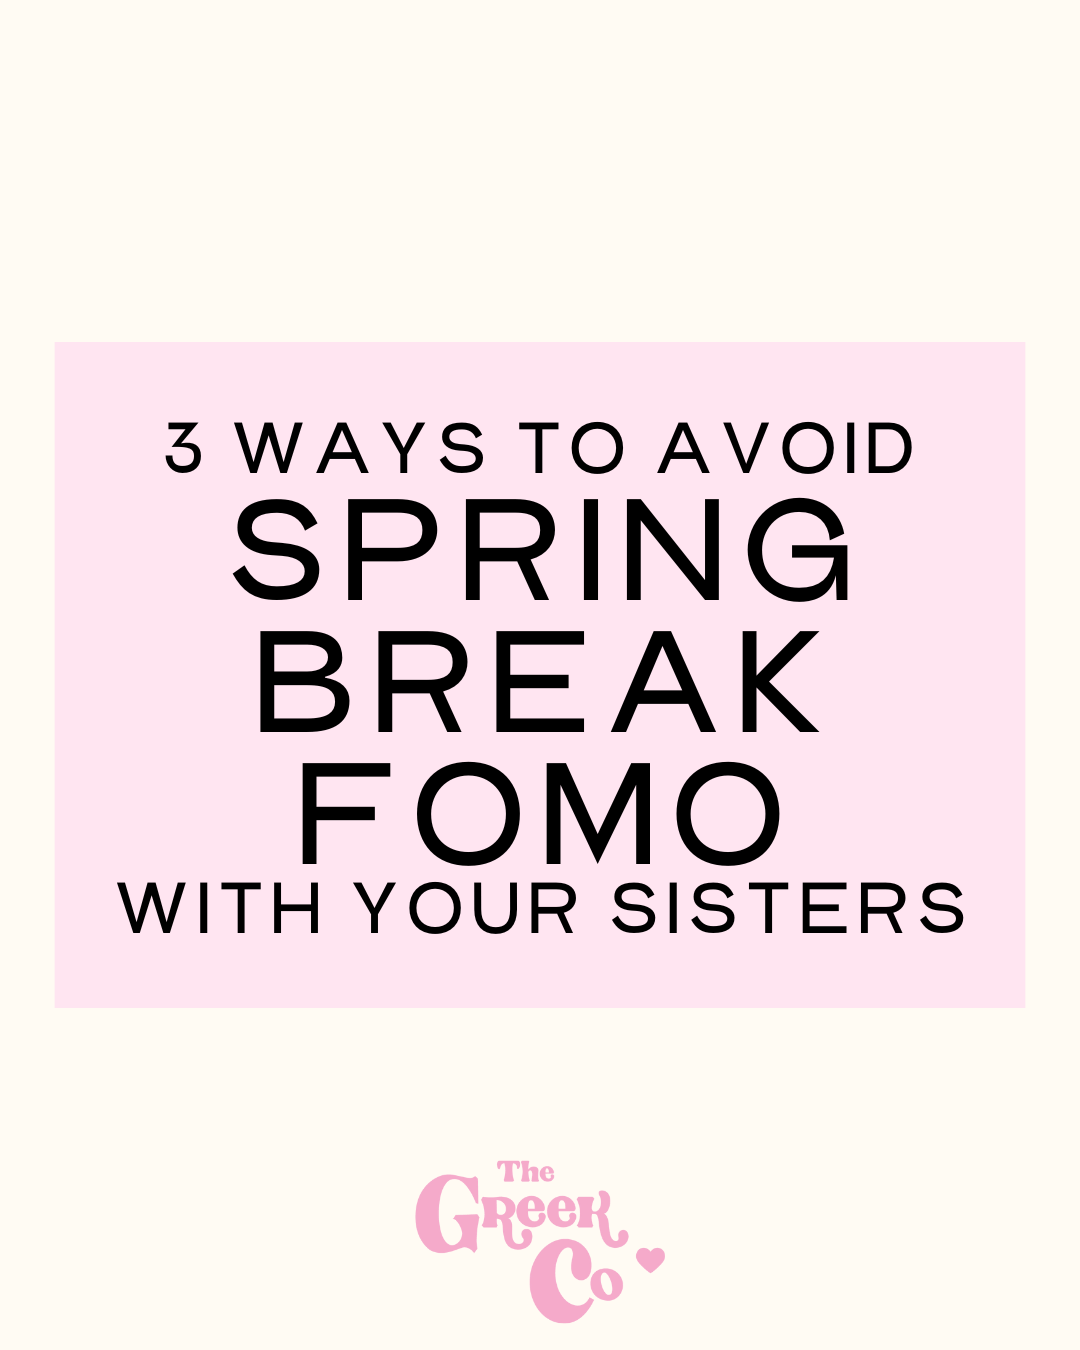 3 Ways to Avoid Spring Break FOMO With Your Sisters